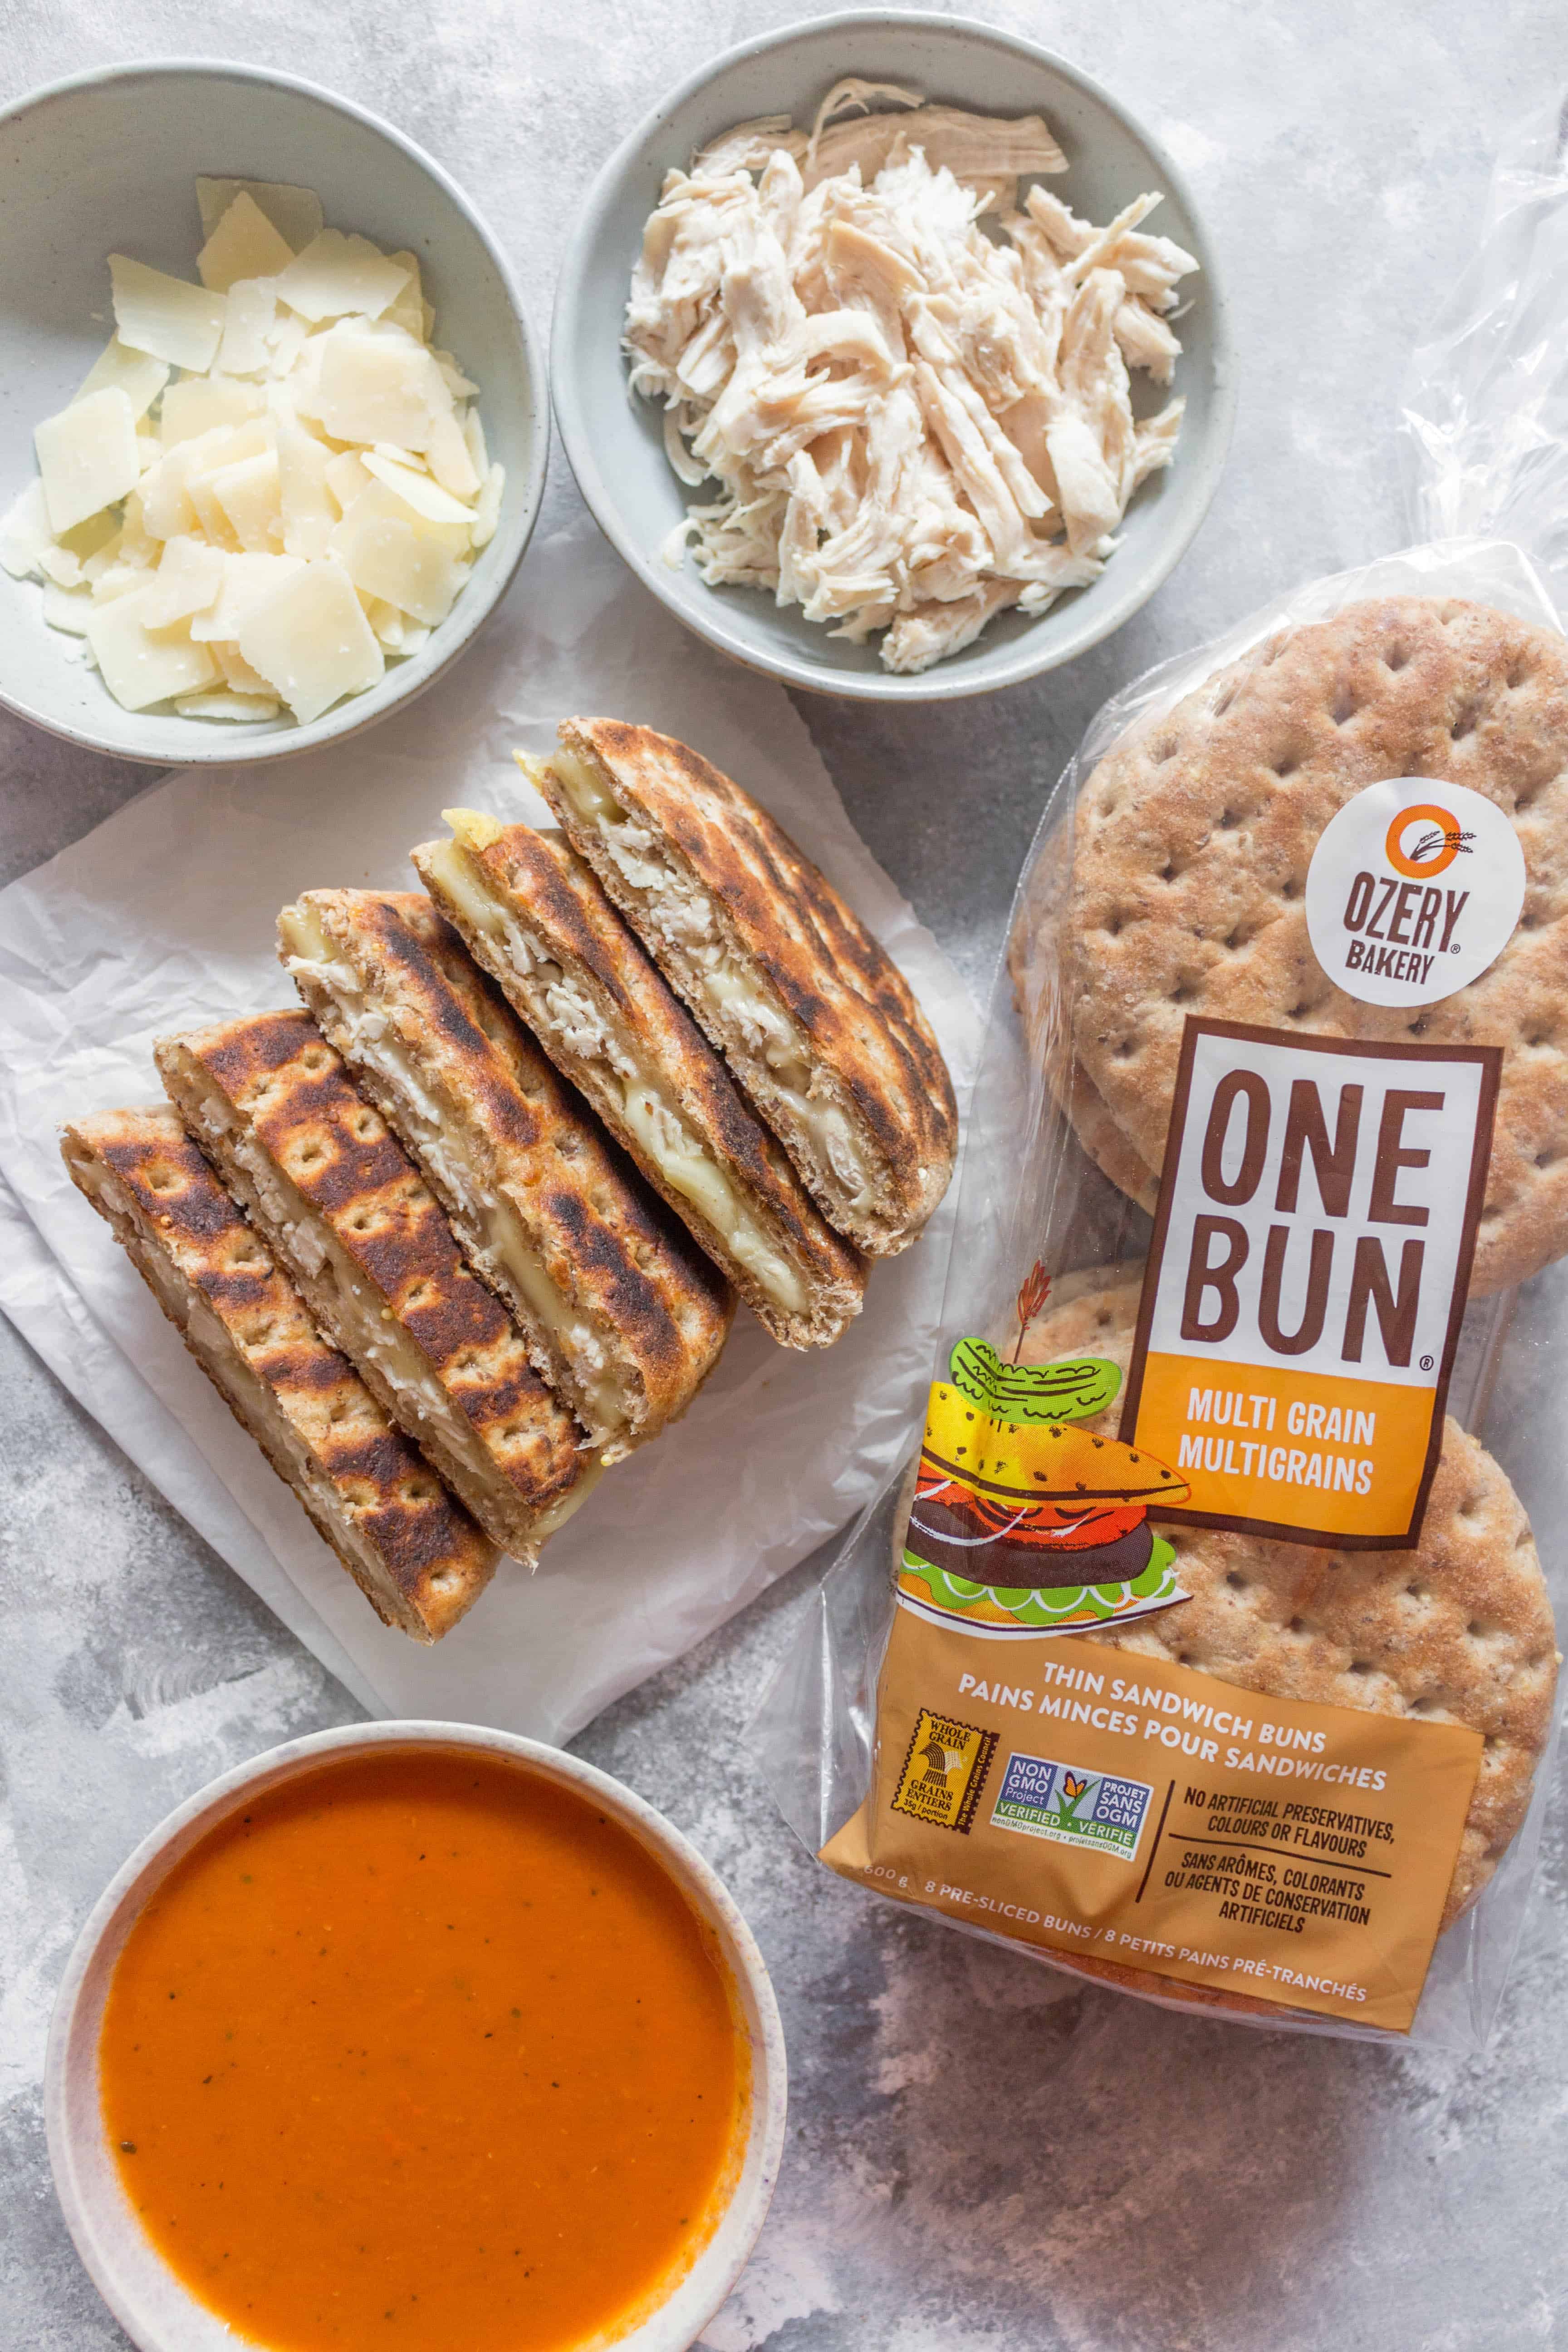 Who's ready for back to school season? Get those lunch boxes ready for the best grilled cheese sandwich featuring OneBun. Double the cheese with a hit of protein, this really is the best grilled cheese you can have for lunch!